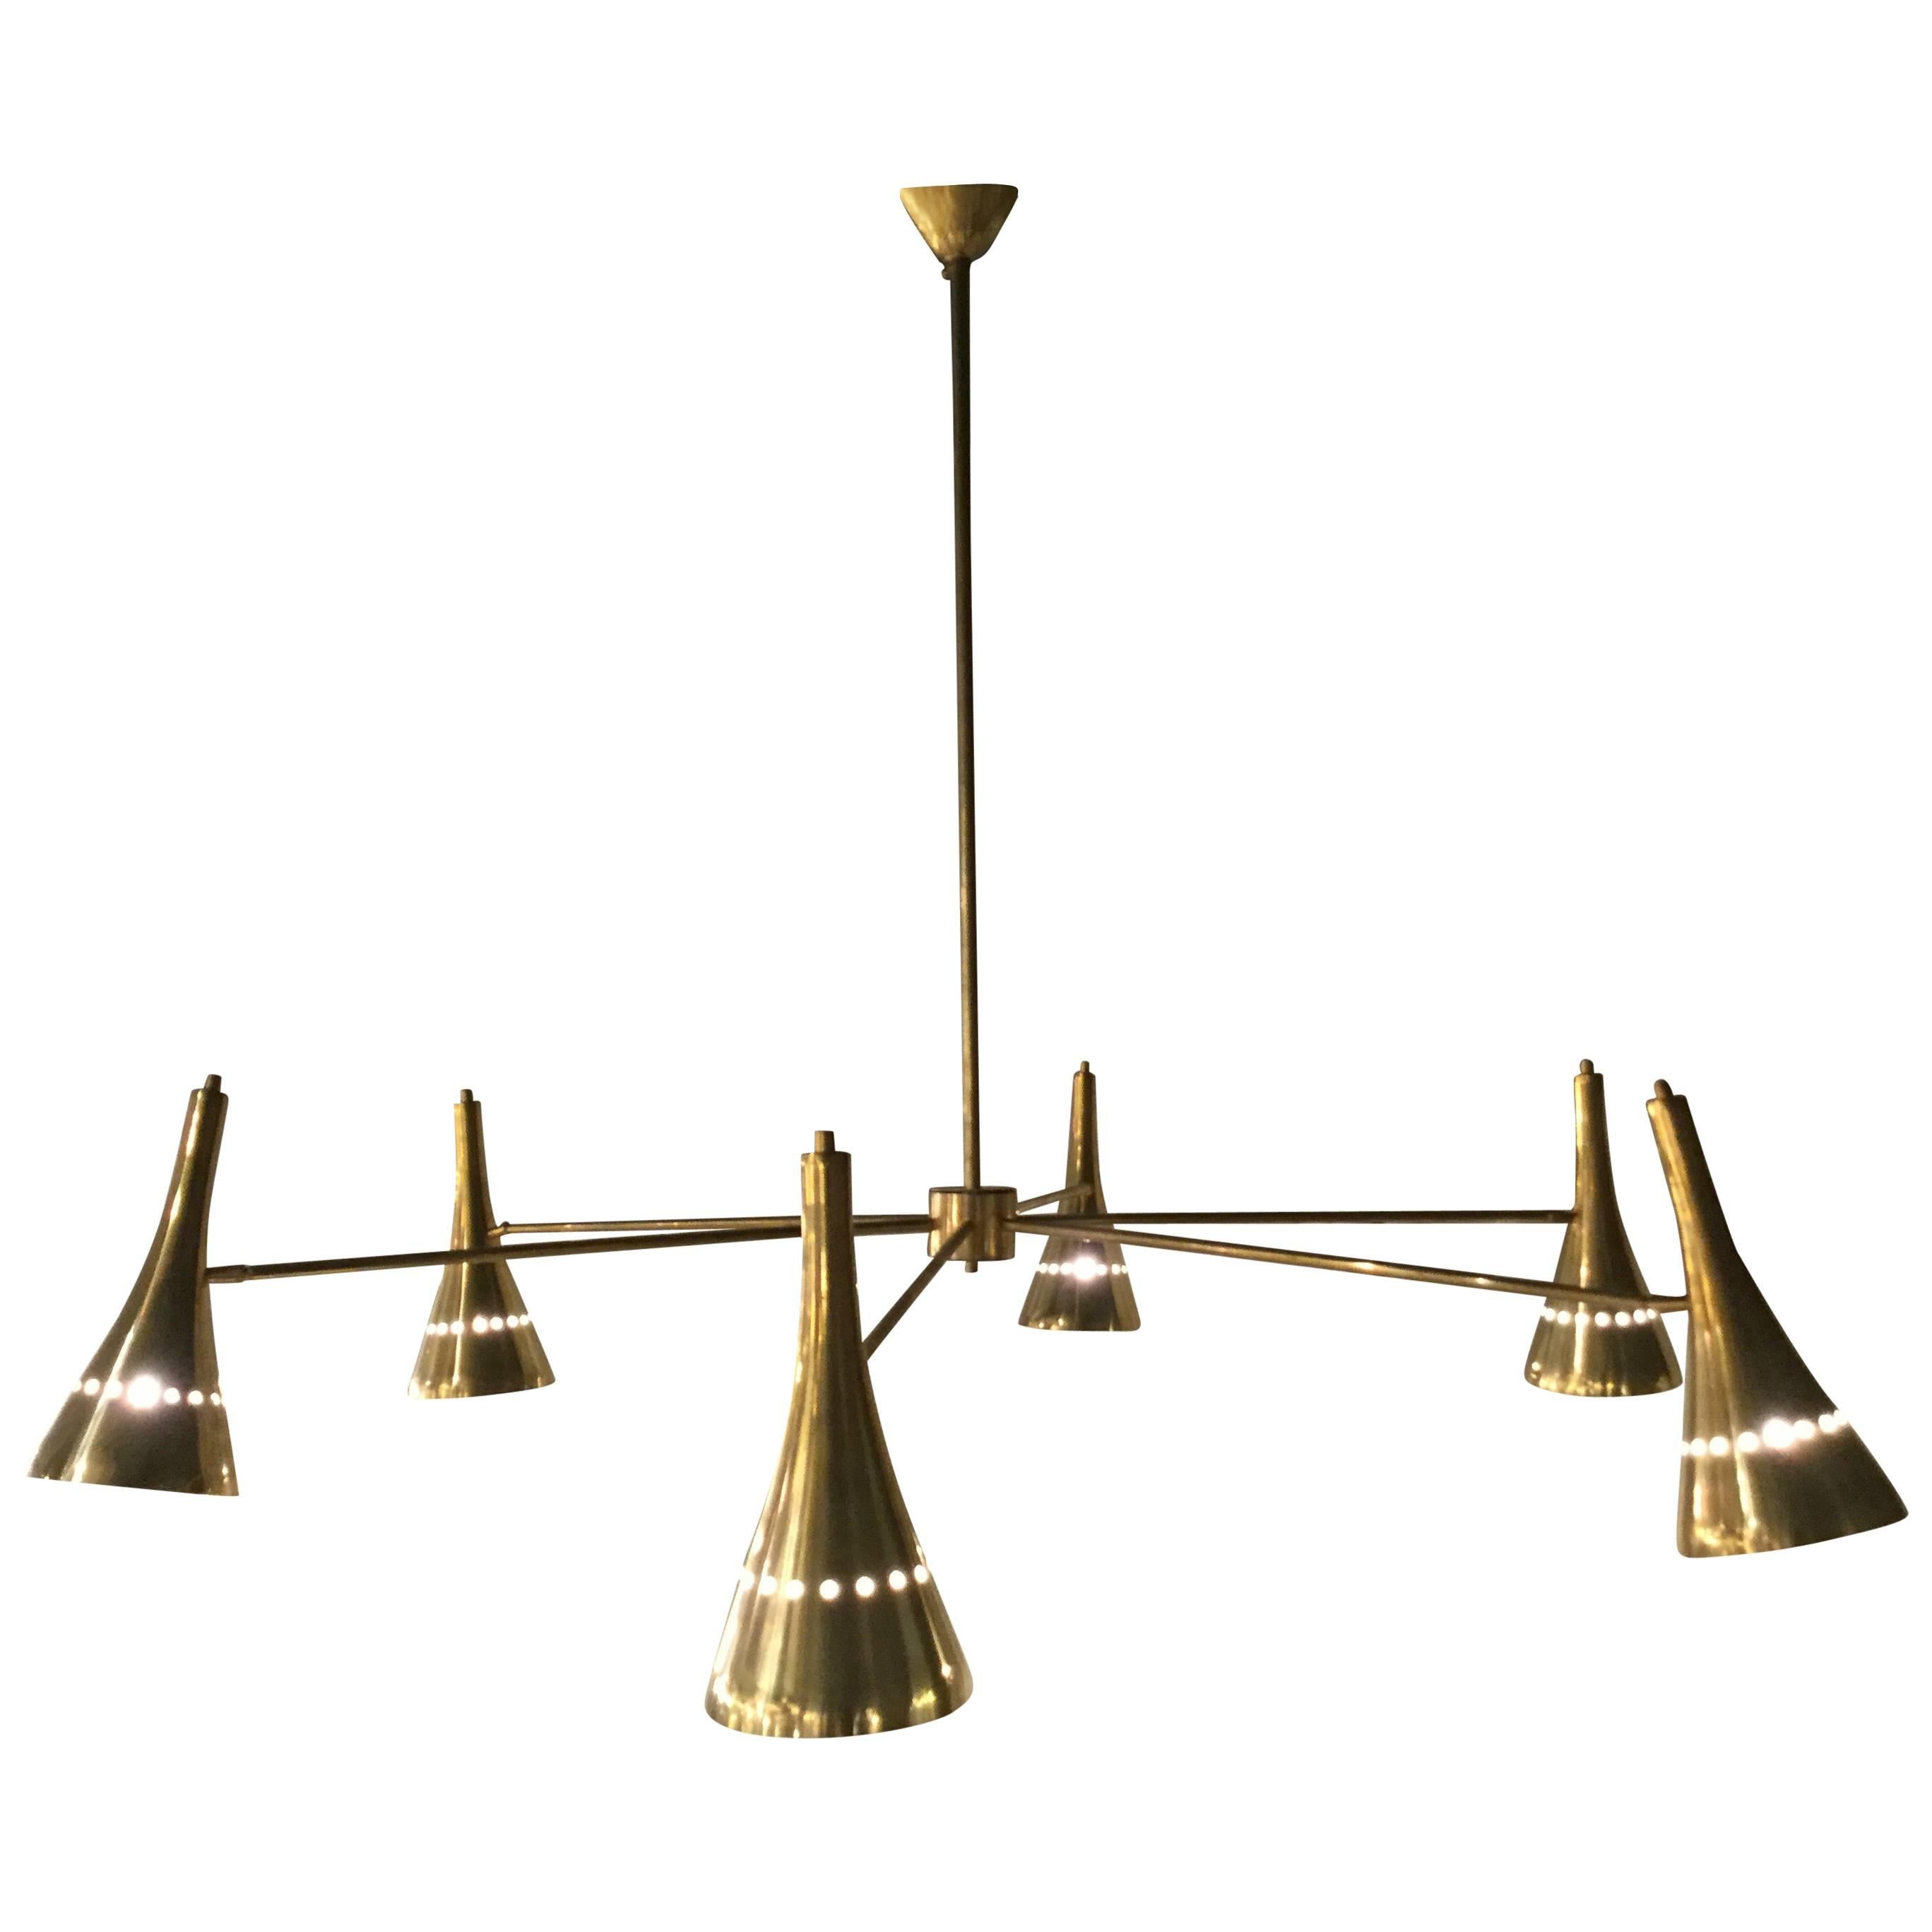 Italian Modernist Chandelier with Six Arms in Brass with Directional Shades